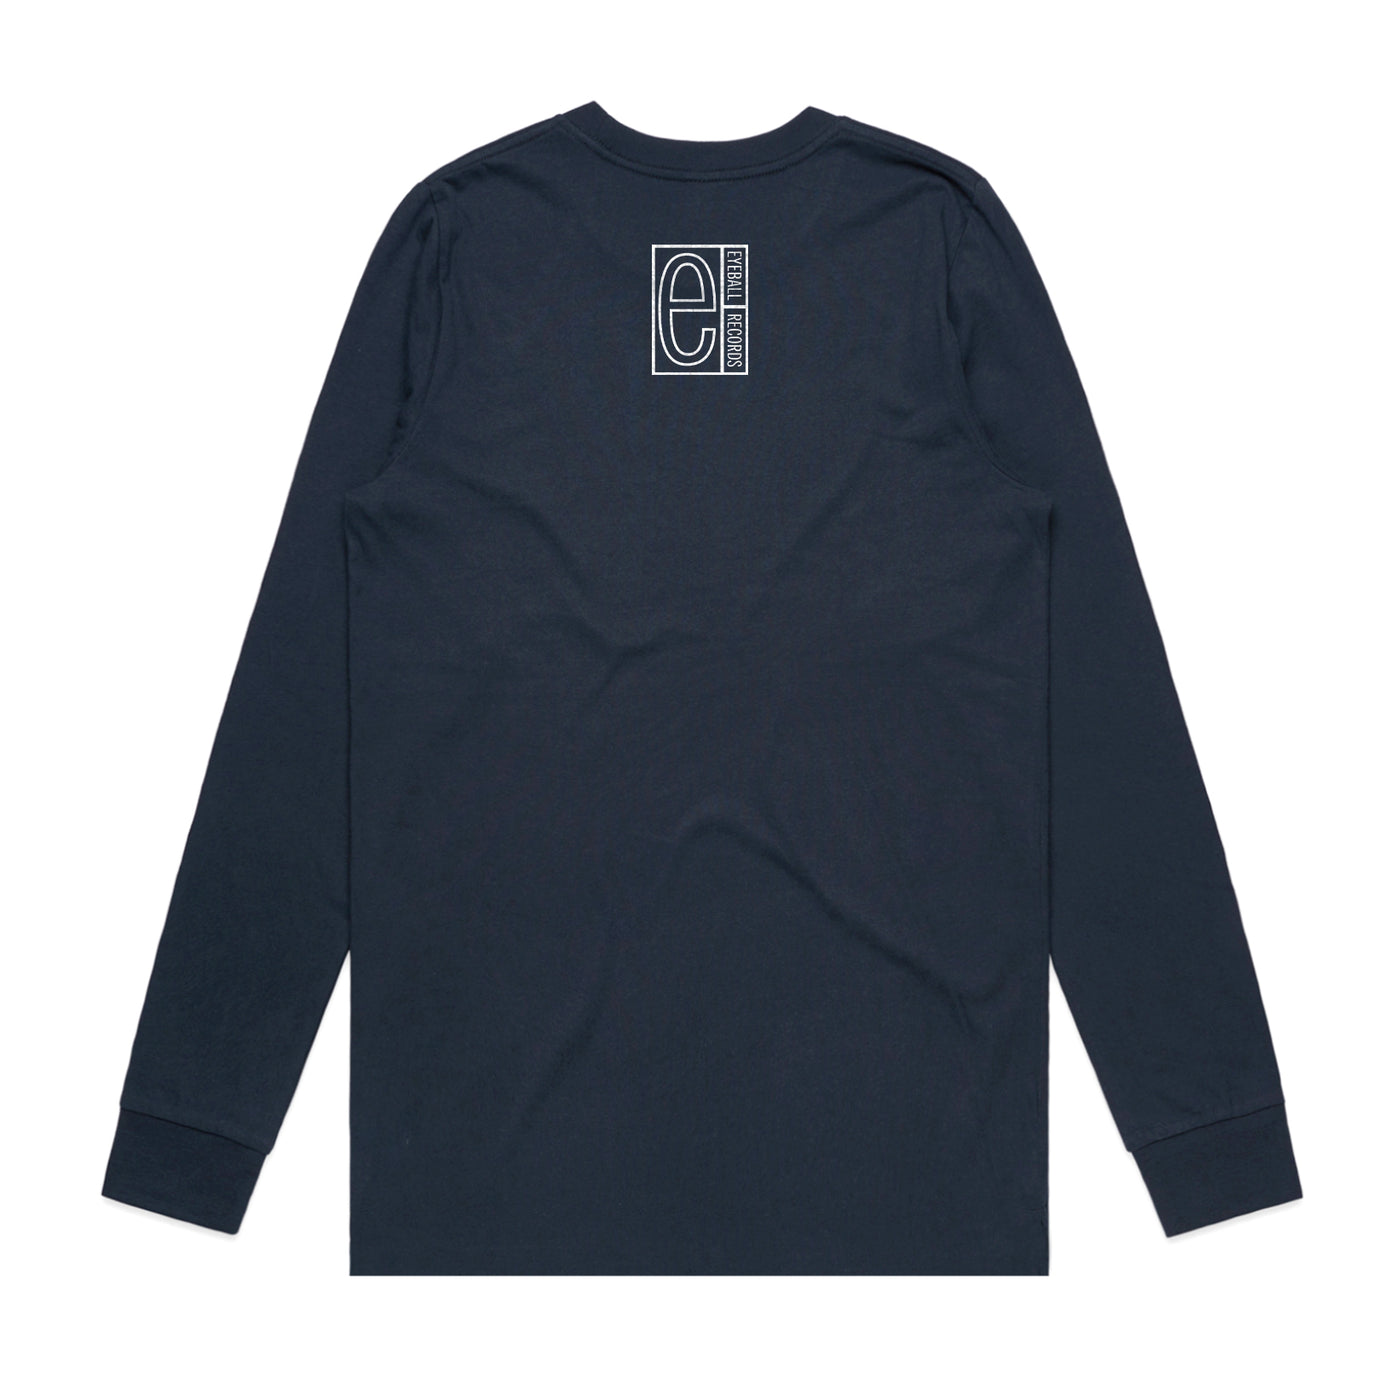 N8NOFACE Missed Connections PREORDER Long Sleeve Tee - Navy + Cassette